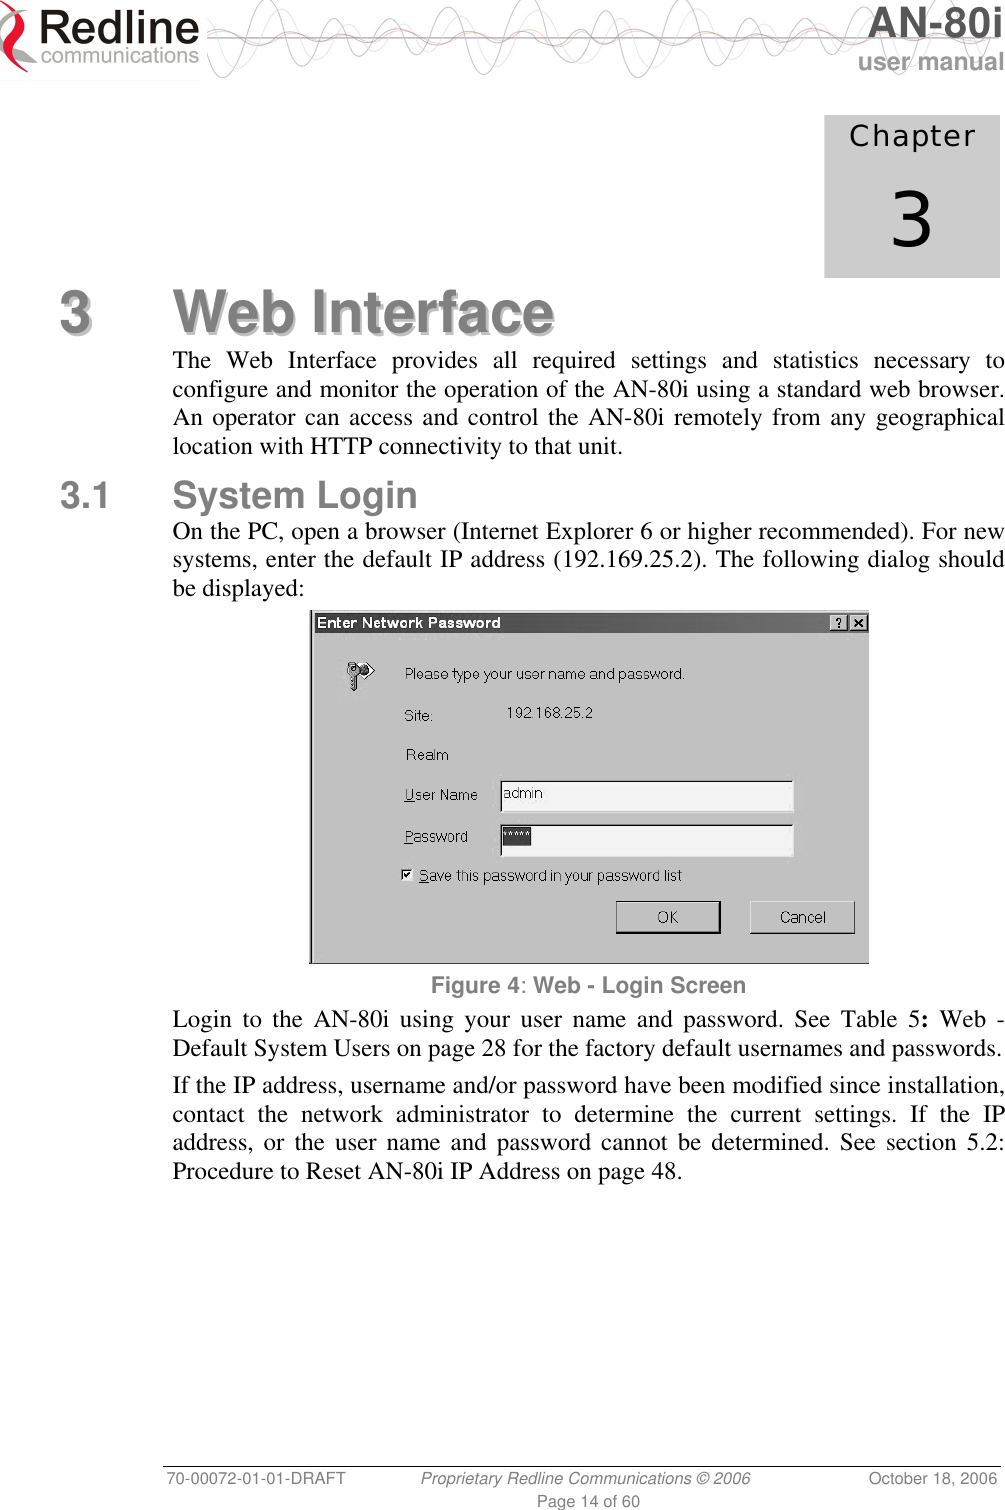   AN-80i user manual 70-00072-01-01-DRAFT  Proprietary Redline Communications © 2006  October 18, 2006 Page 14 of 60             Chapter 3 33  WWeebb  IInntteerrffaaccee  The Web Interface provides all required settings and statistics necessary to configure and monitor the operation of the AN-80i using a standard web browser. An operator can access and control the AN-80i remotely from any geographical location with HTTP connectivity to that unit. 3.1 System Login On the PC, open a browser (Internet Explorer 6 or higher recommended). For new systems, enter the default IP address (192.169.25.2). The following dialog should be displayed:  Figure 4: Web - Login Screen Login to the AN-80i using your user name and password. See Table 5: Web - Default System Users on page 28 for the factory default usernames and passwords. If the IP address, username and/or password have been modified since installation, contact the network administrator to determine the current settings. If the IP address, or the user name and password cannot be determined. See section 5.2: Procedure to Reset AN-80i IP Address on page 48. 